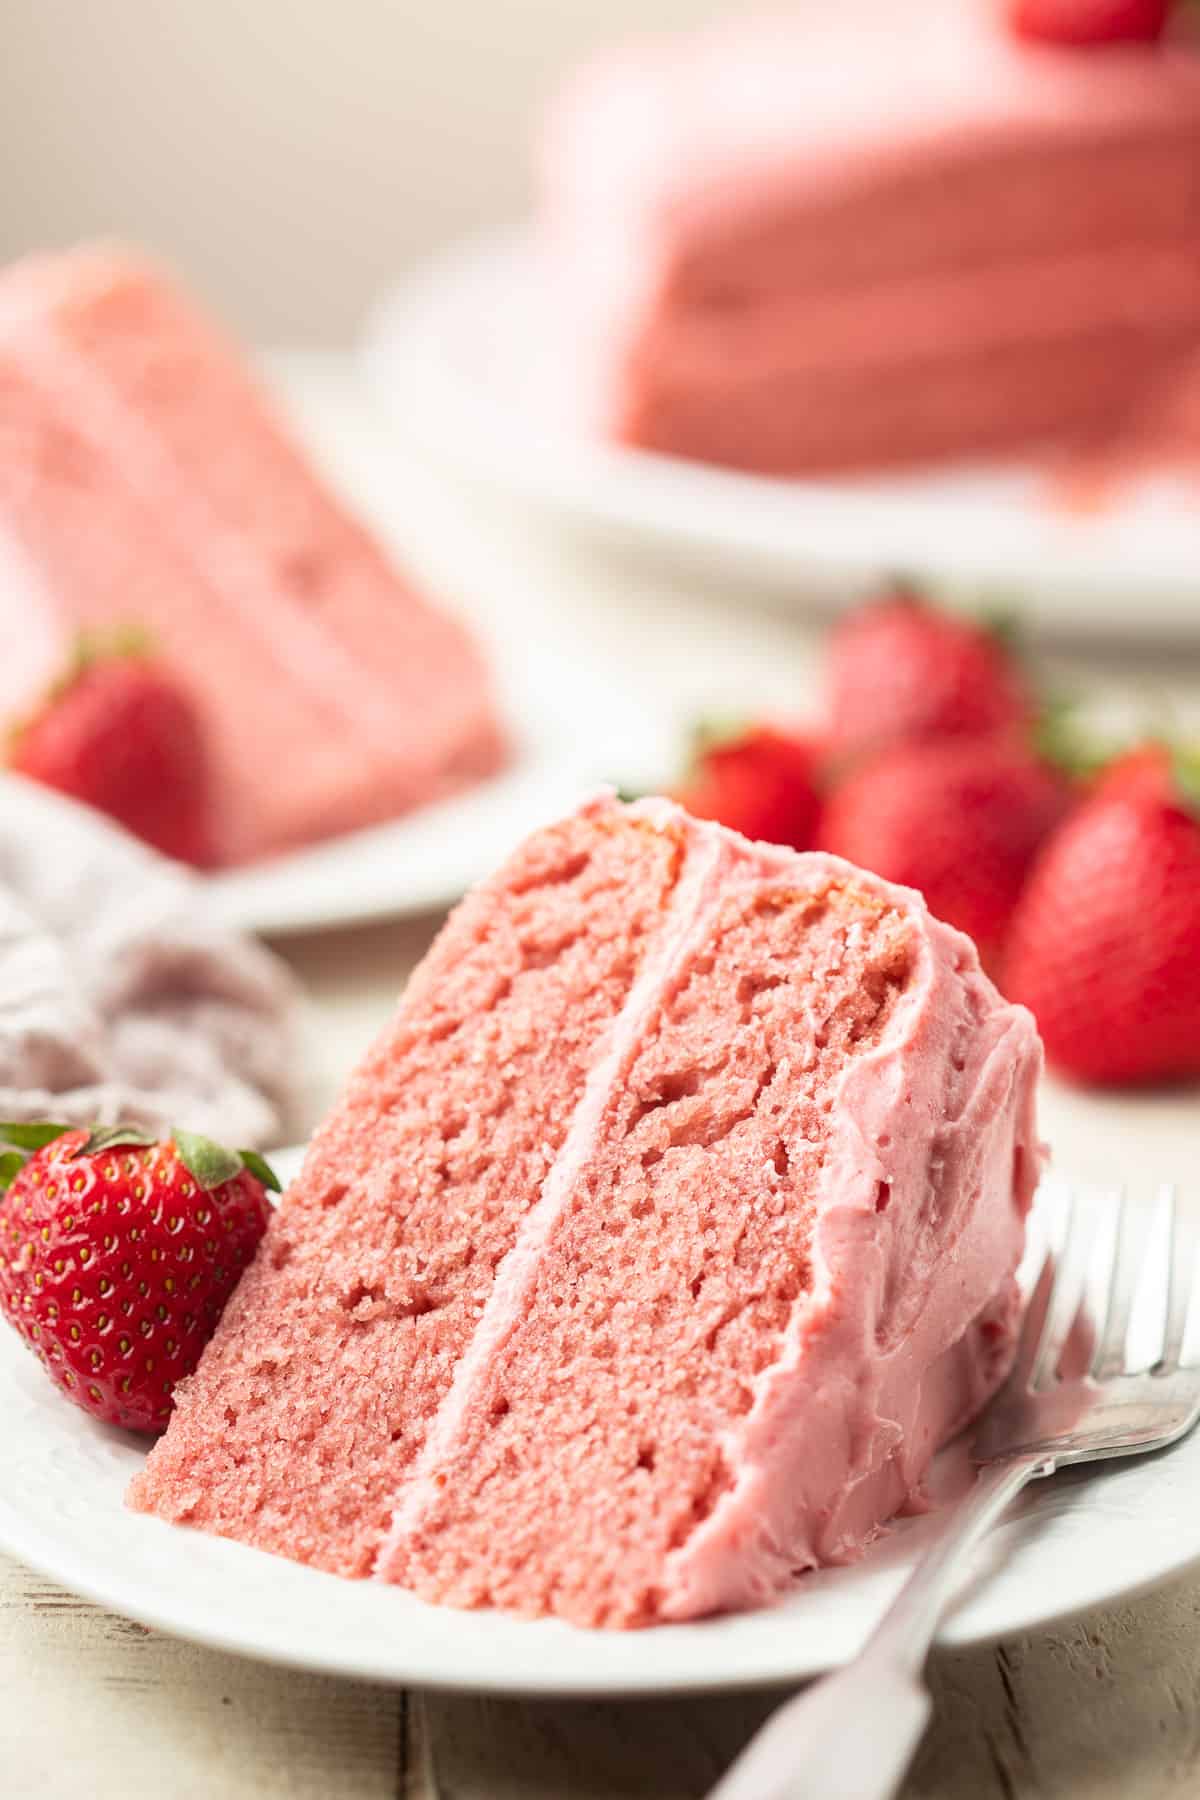 Vegan Strawberry Cake slices on a dish with cake and berries in the background.